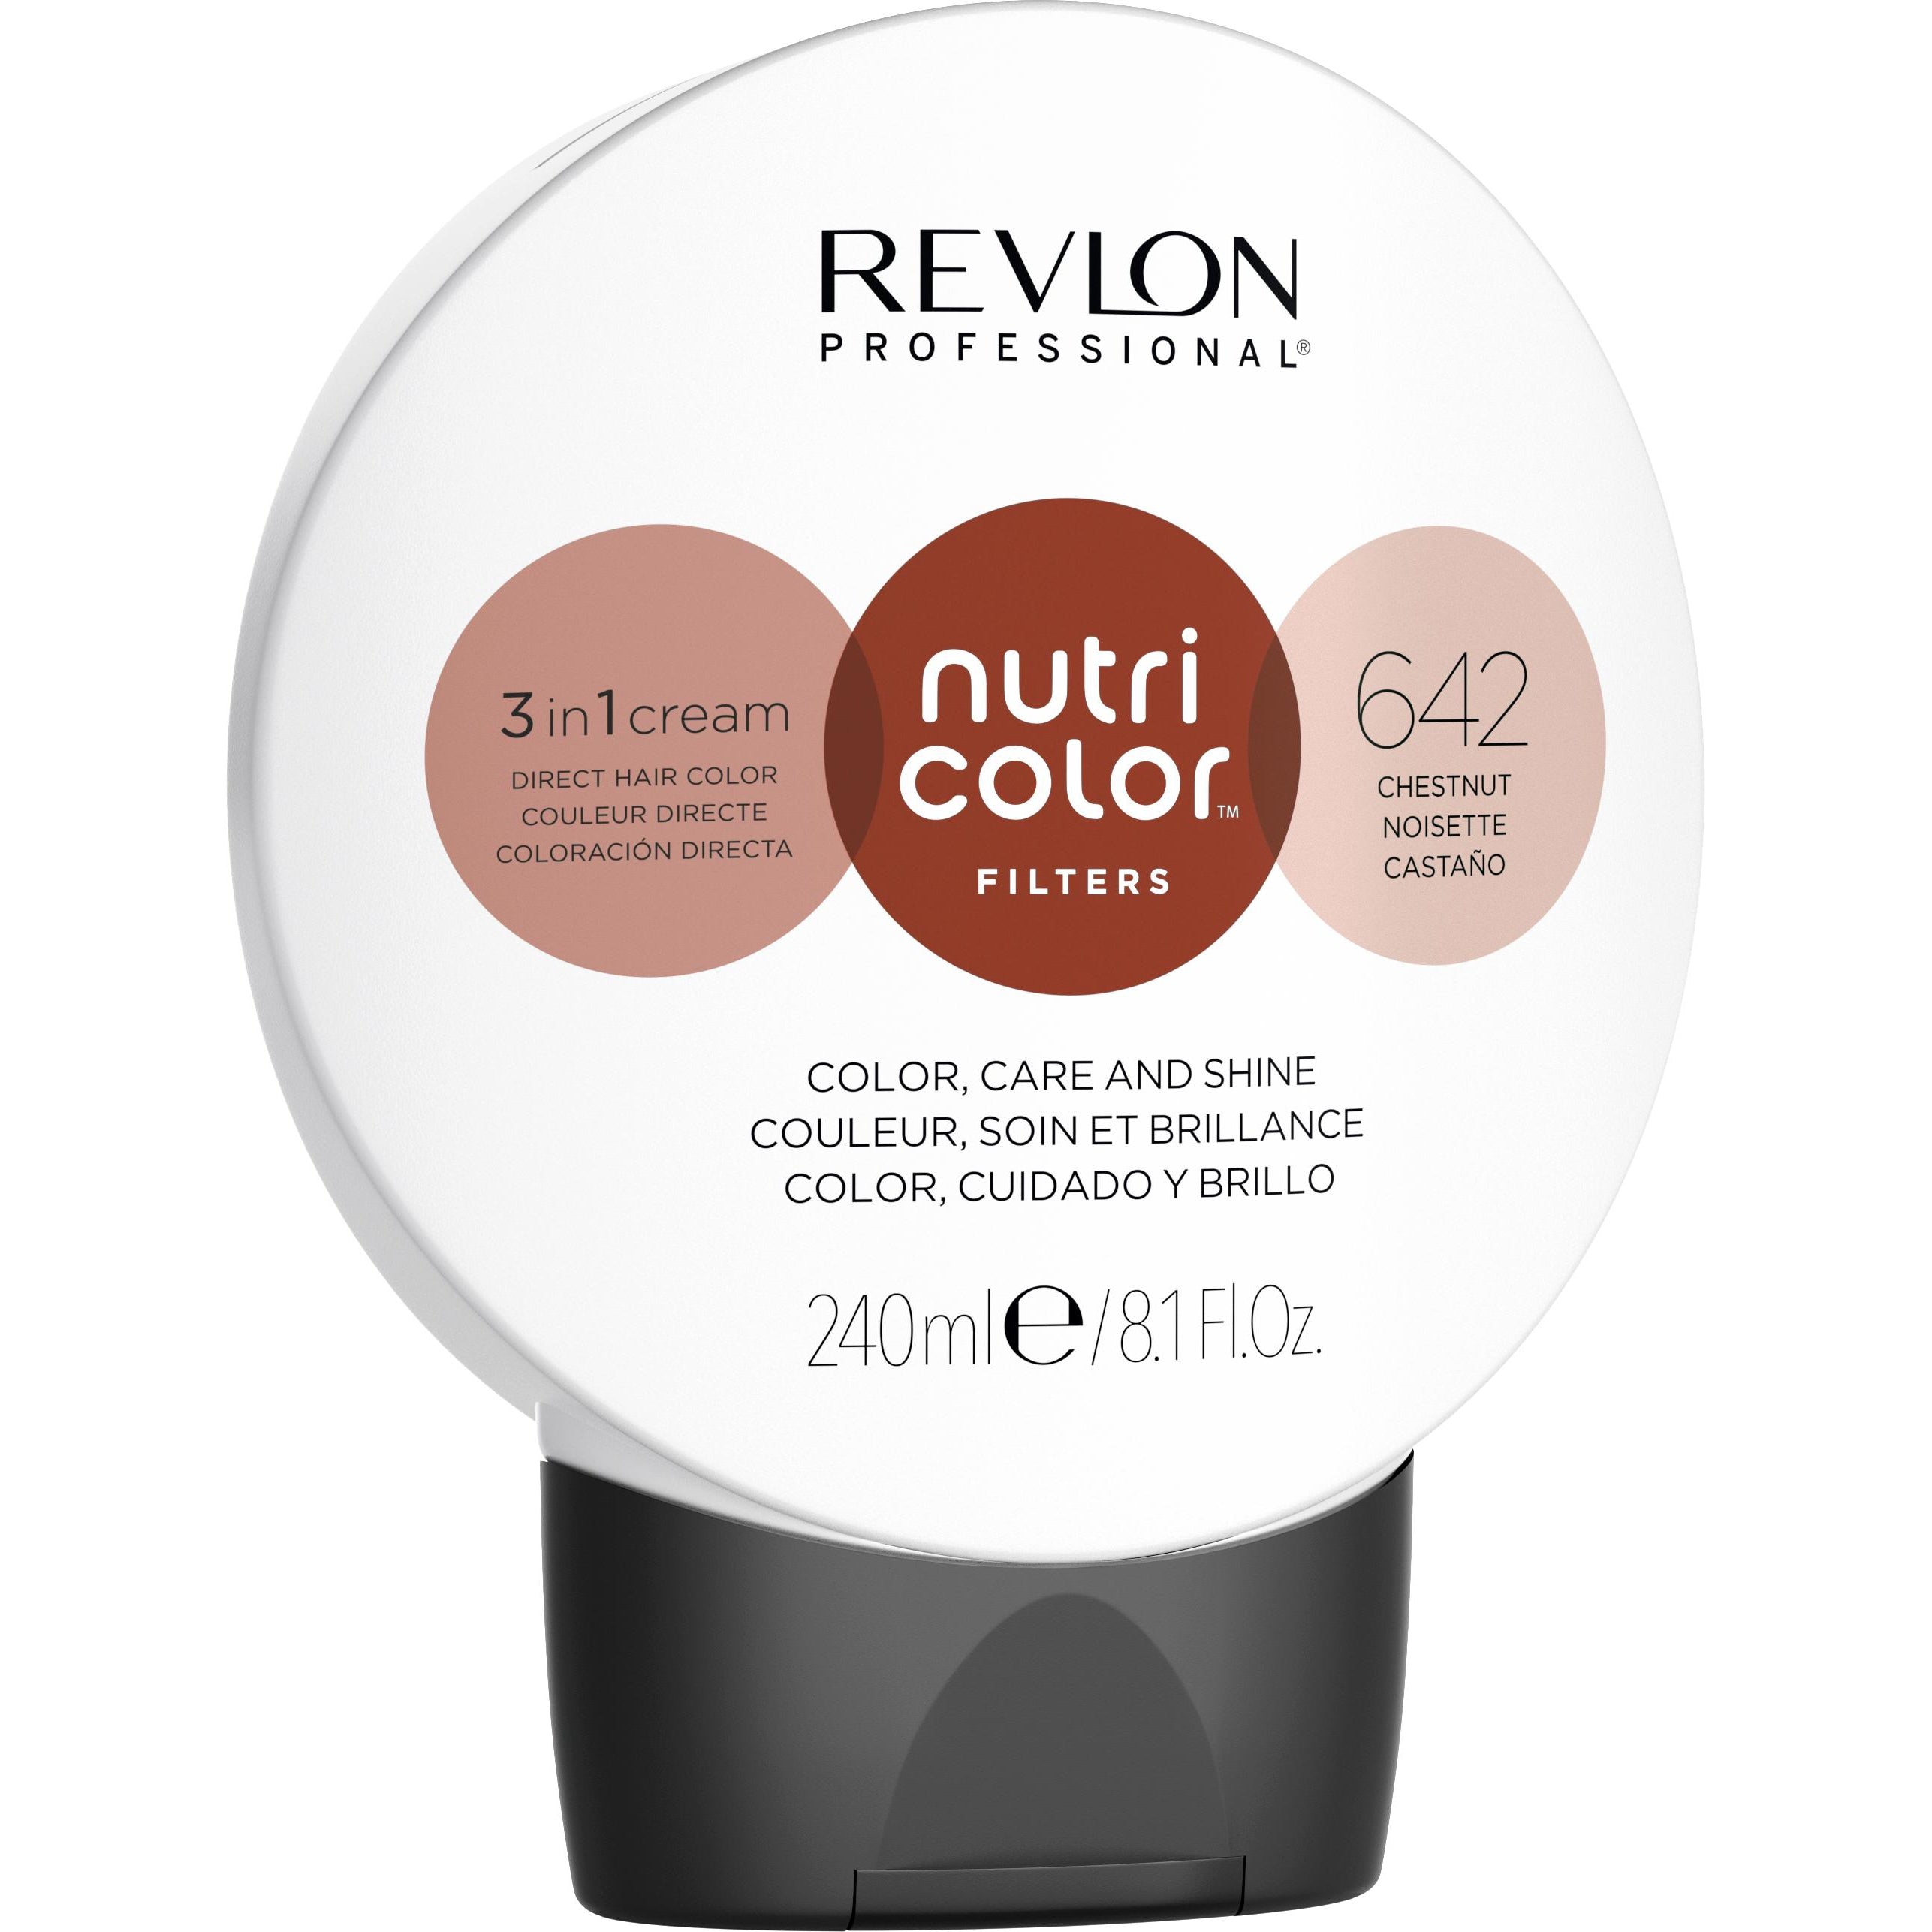 Luxury_haircare_revlon-professional-nutri-color-creme_NCC-Filter-Ball-642